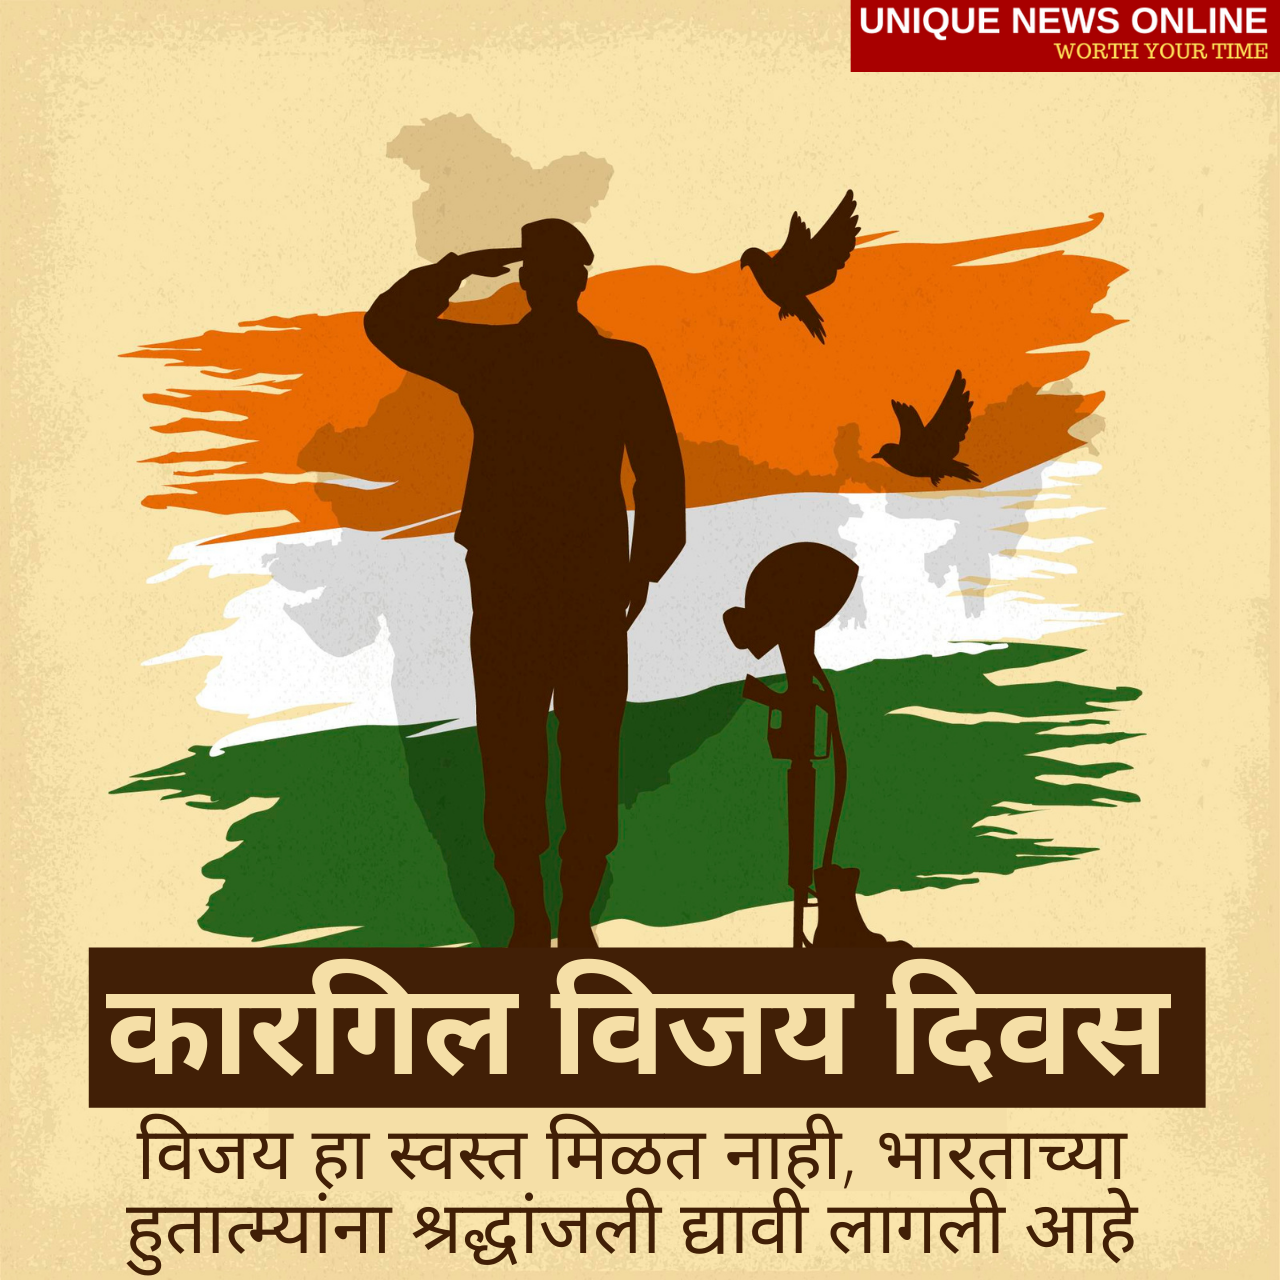 Kargil Vijay Diwas 2021 Marathi and Sanskrit Quotes, Wishes, Images, Poster, Status, Greetings and Messages to share